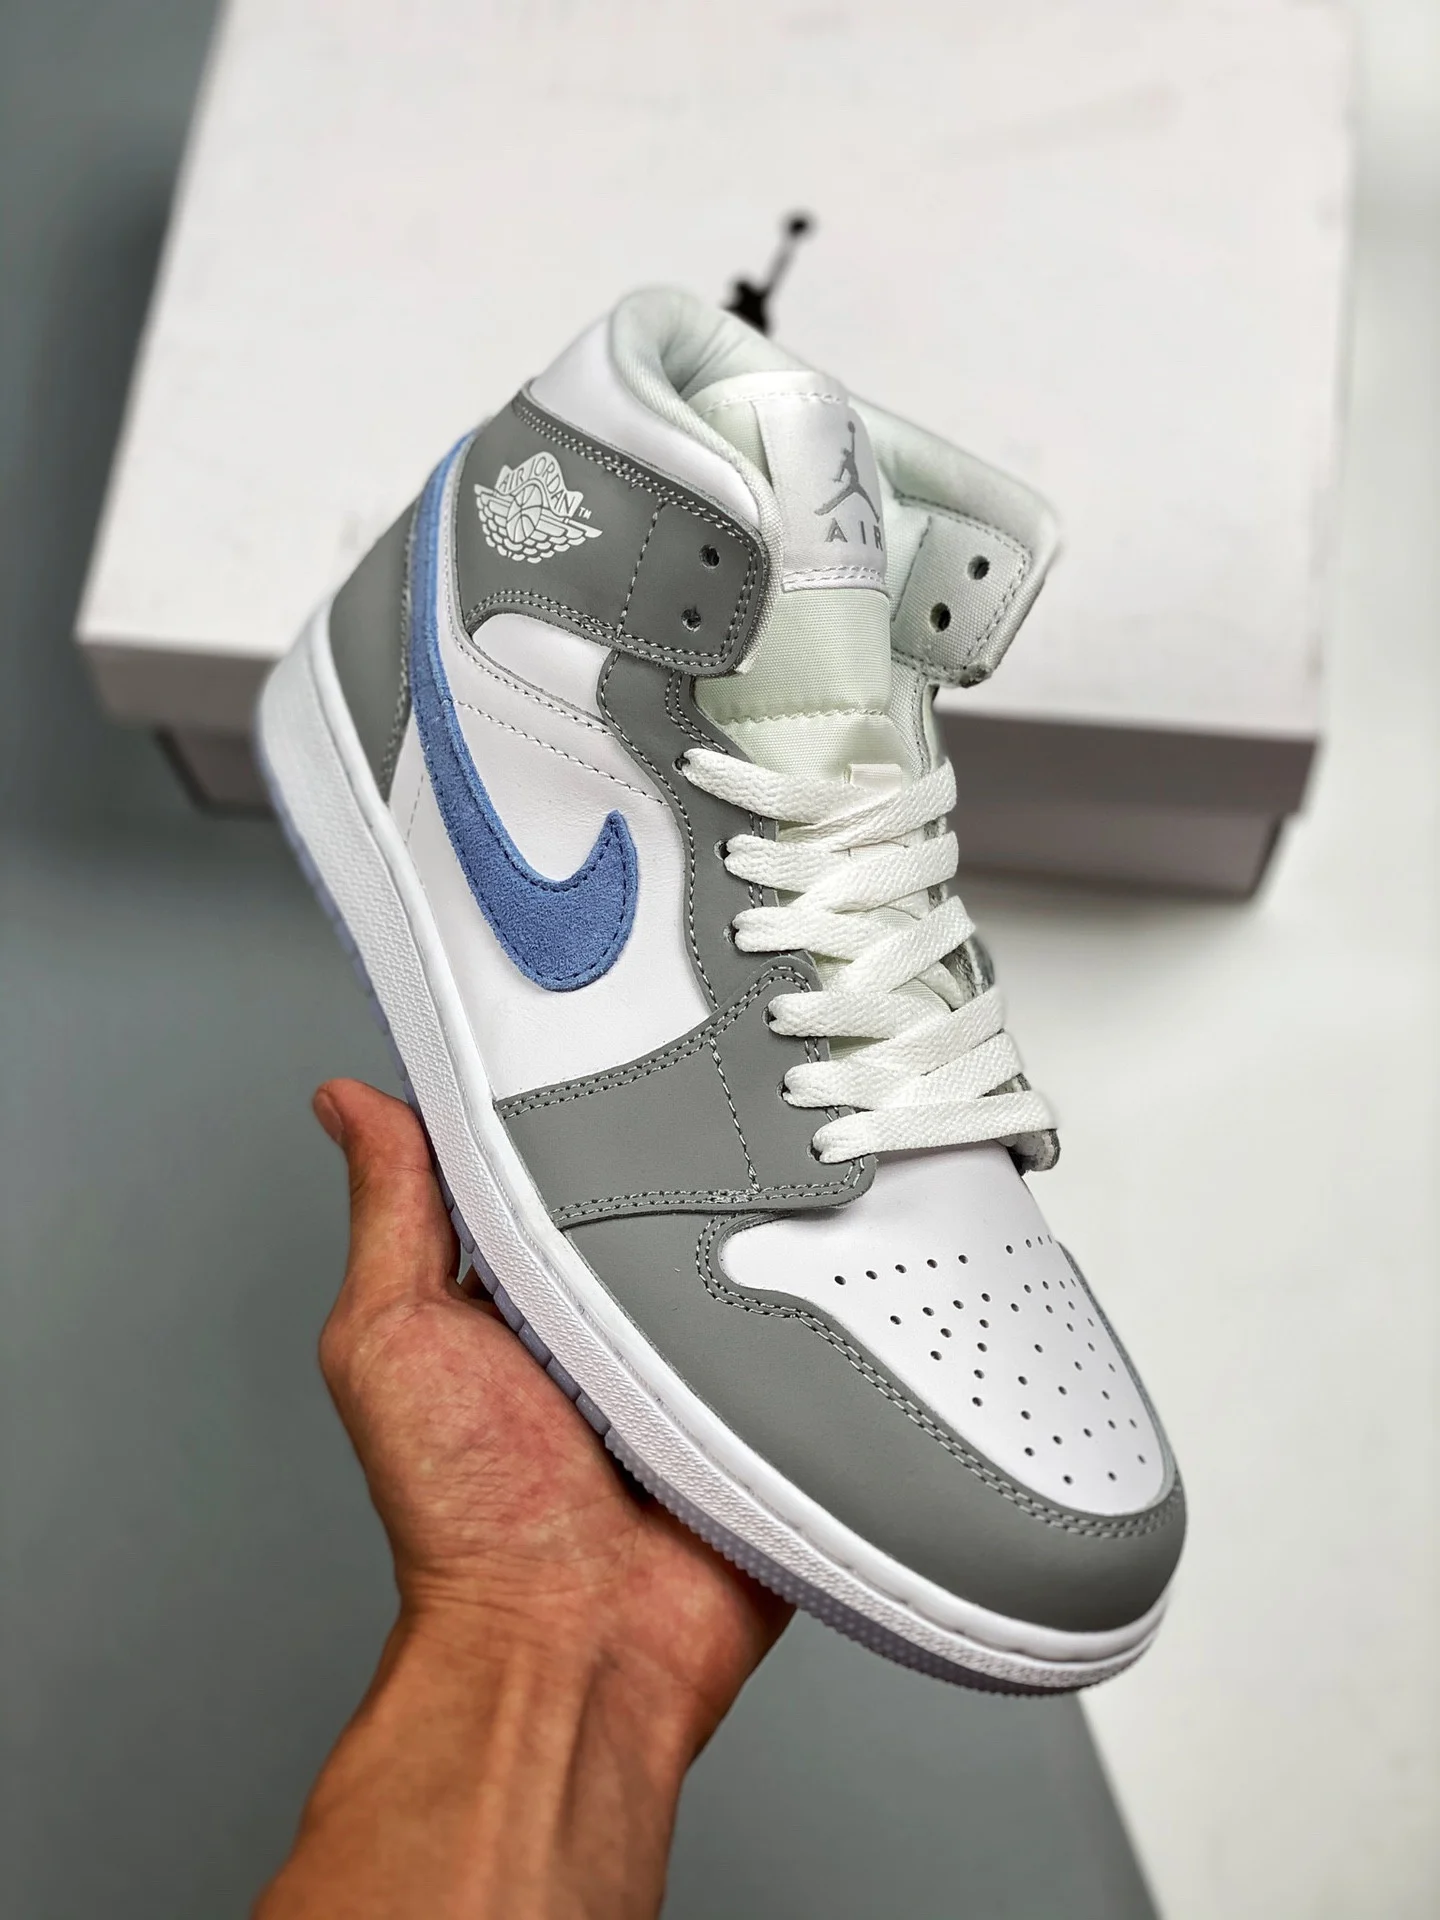 Air Jordan 1 Mid White Grey Blue With Icy Soles